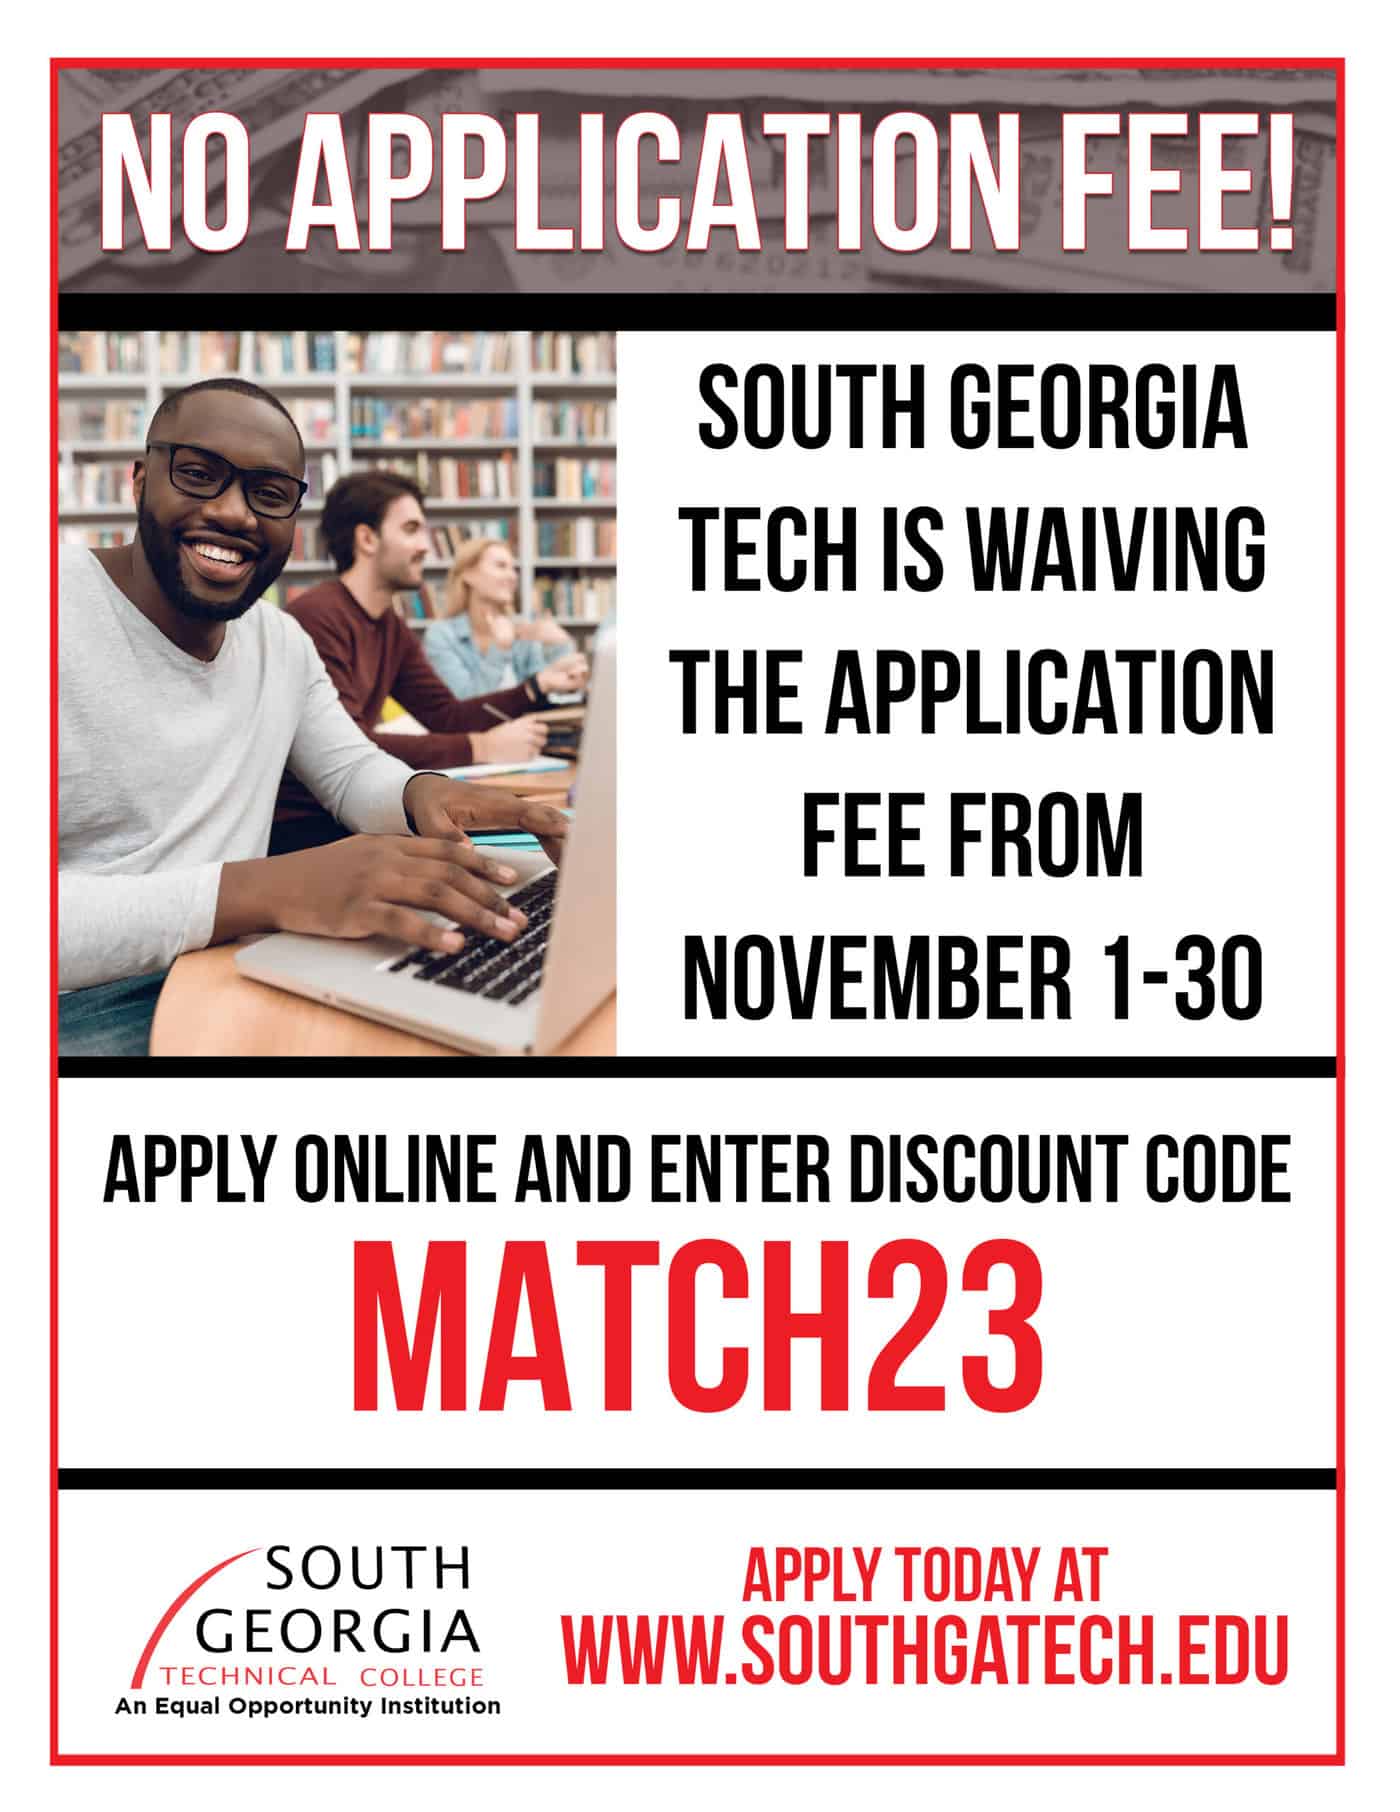 SGTC participating in No Fee November and waiving the Application Fee during the month of November.